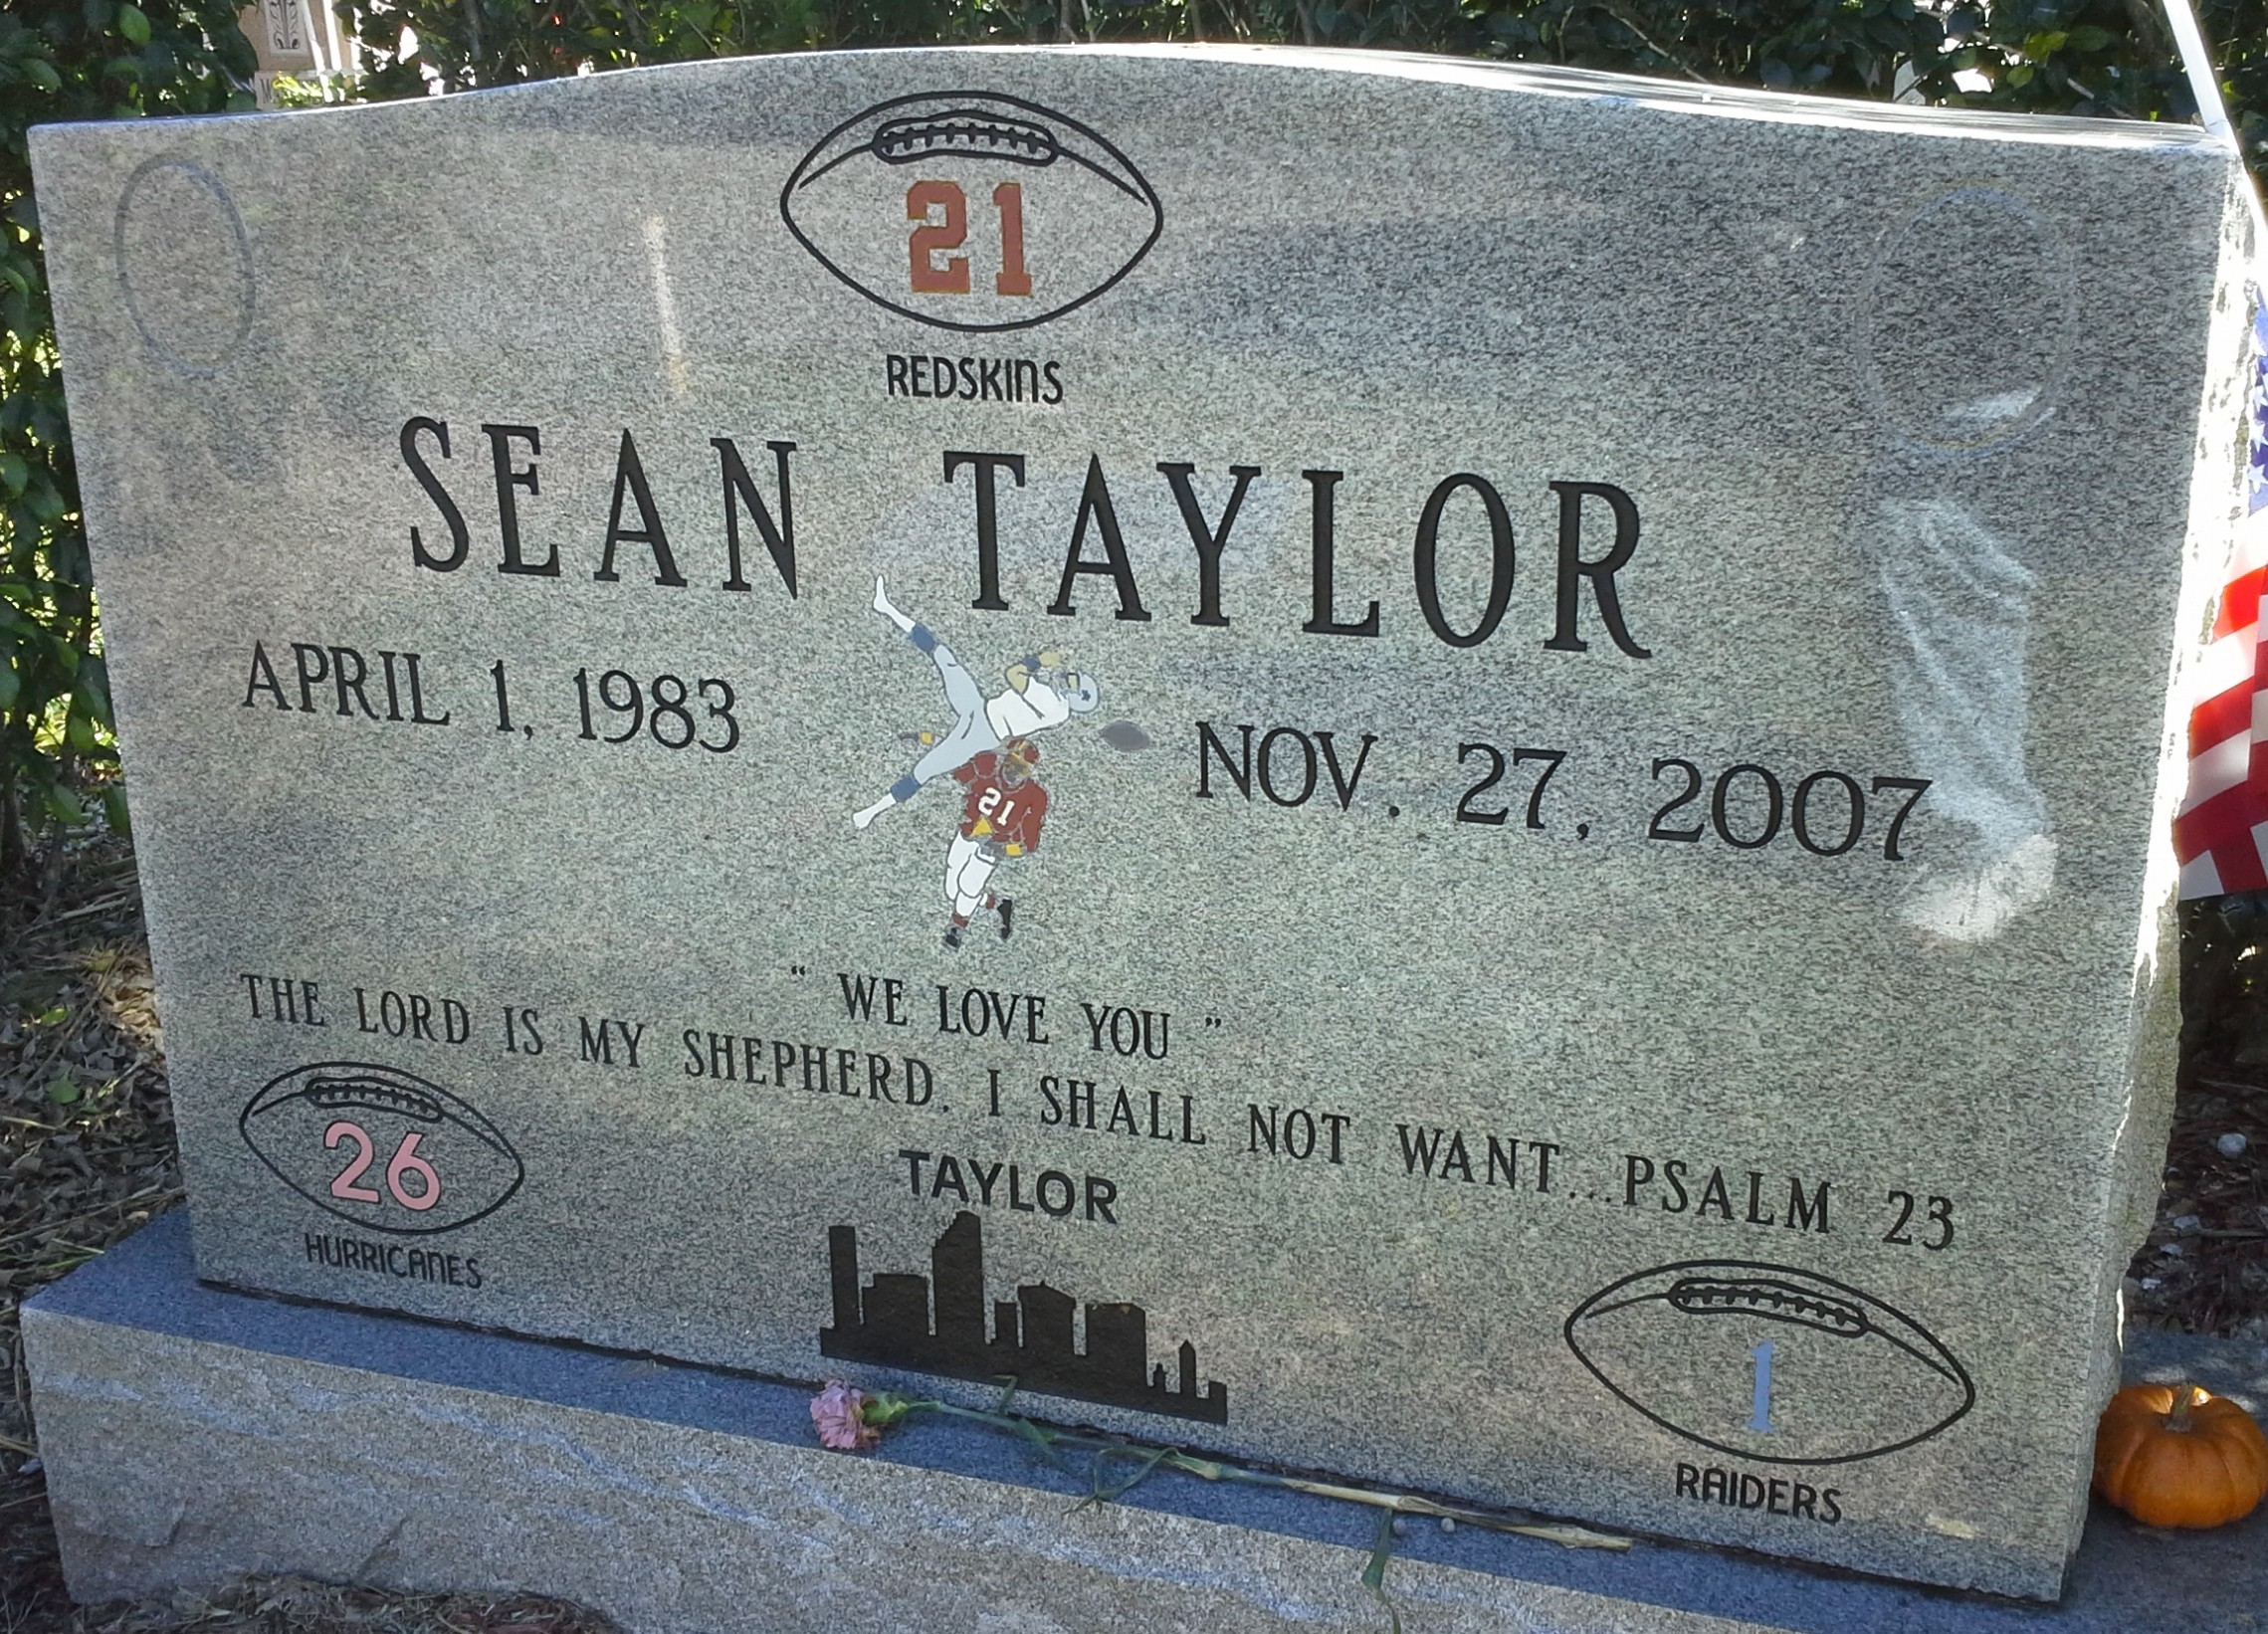 2279x1642 Rest In Peace Sean Taylor it's 21 in the strap